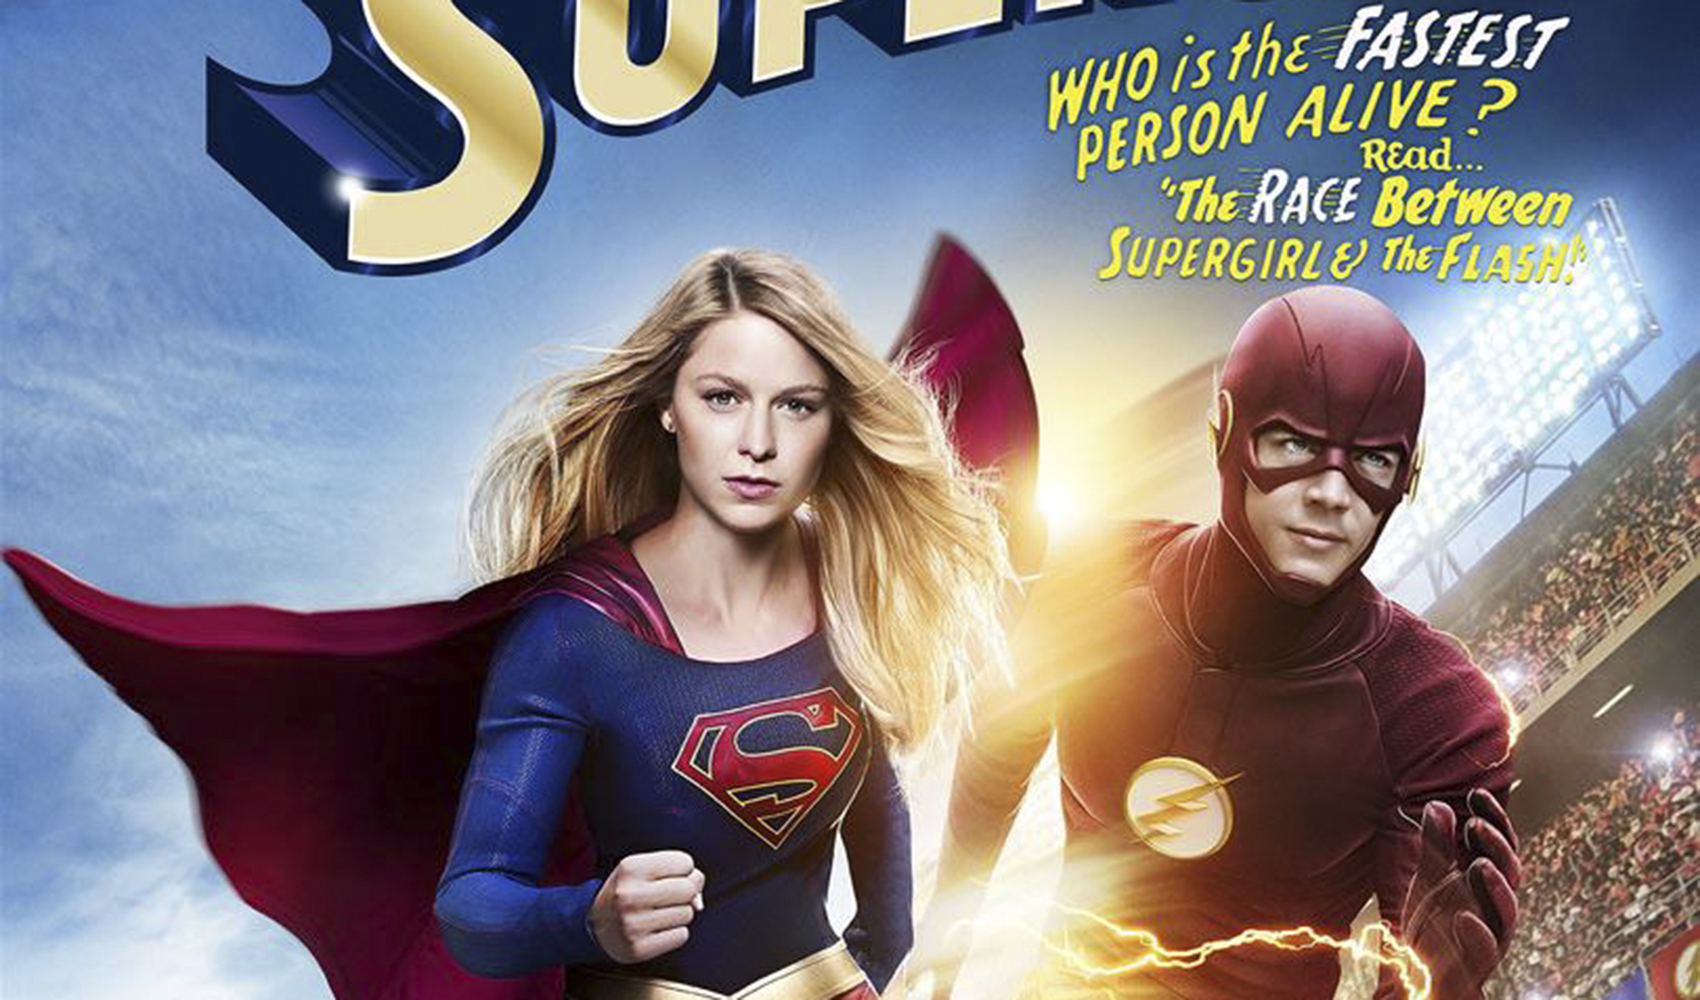 crossover - Supergirl / Flash : World's (not so) finest supergirl the flash crossover poster2